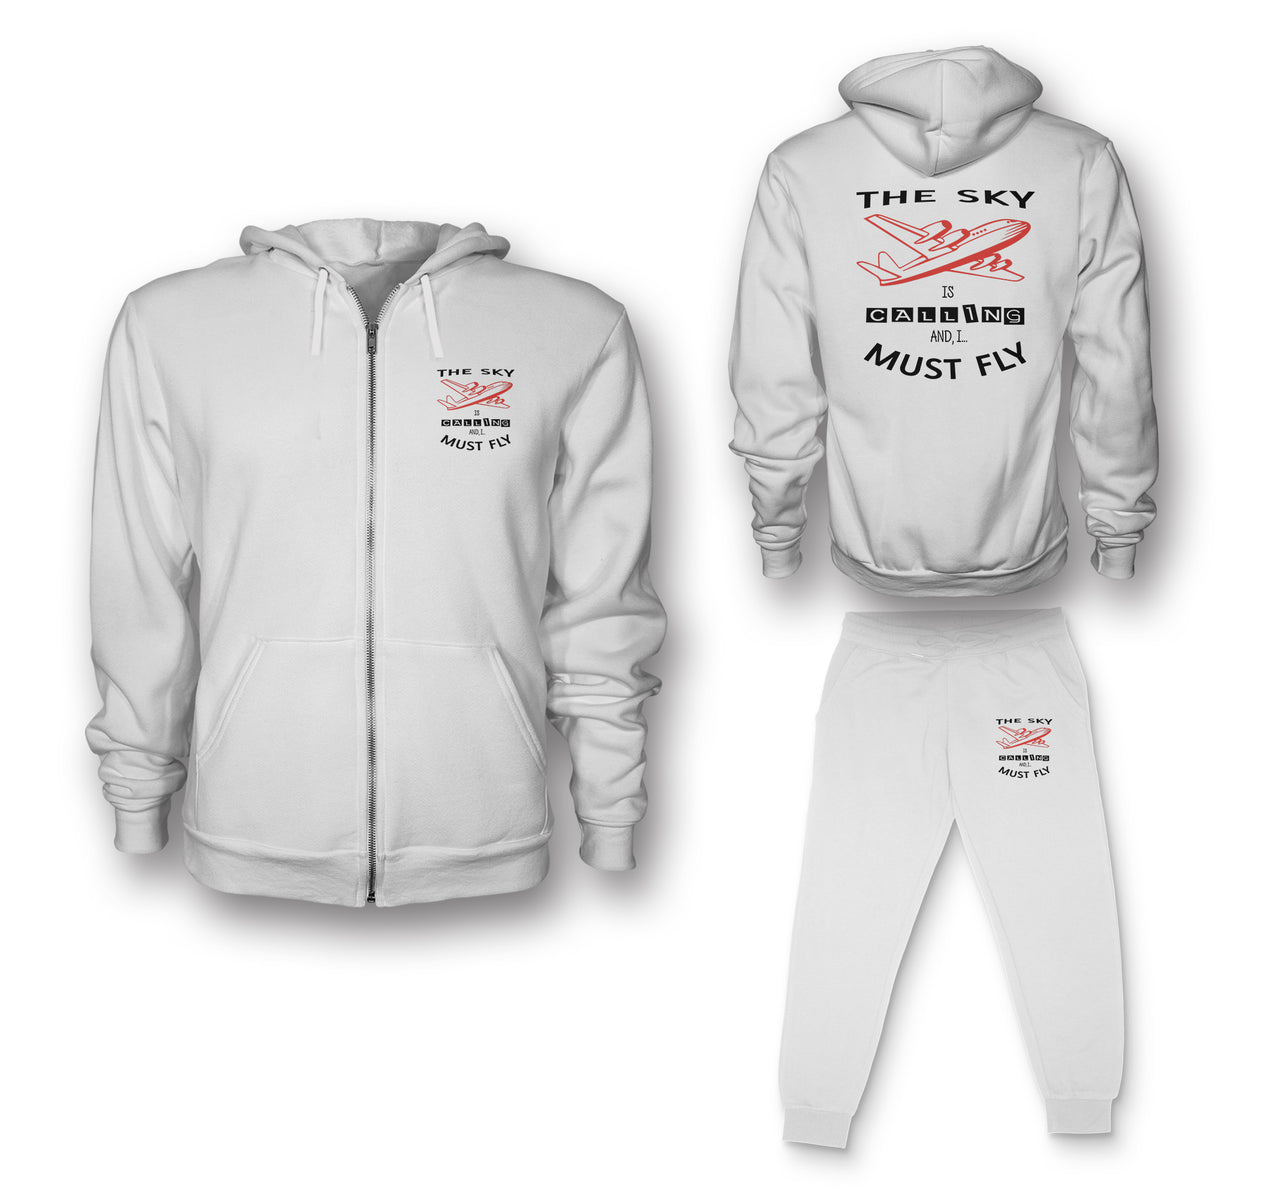 The Sky is Calling and I Must Fly Designed Zipped Hoodies & Sweatpants Set